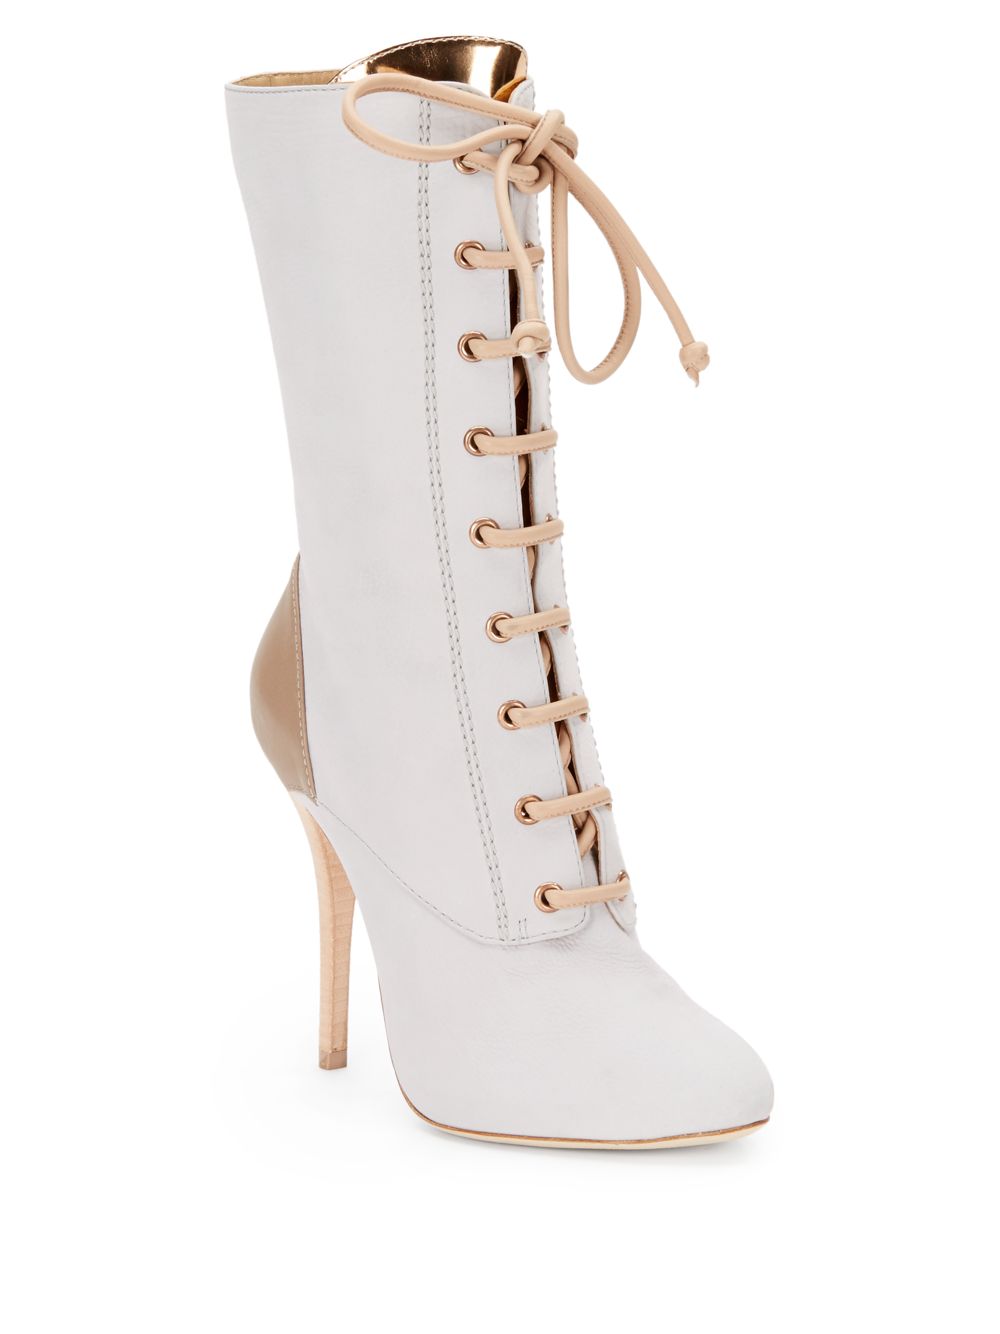 Lyst - Giuseppe Zanotti Leather Heeled Mid-Calf Boots in White